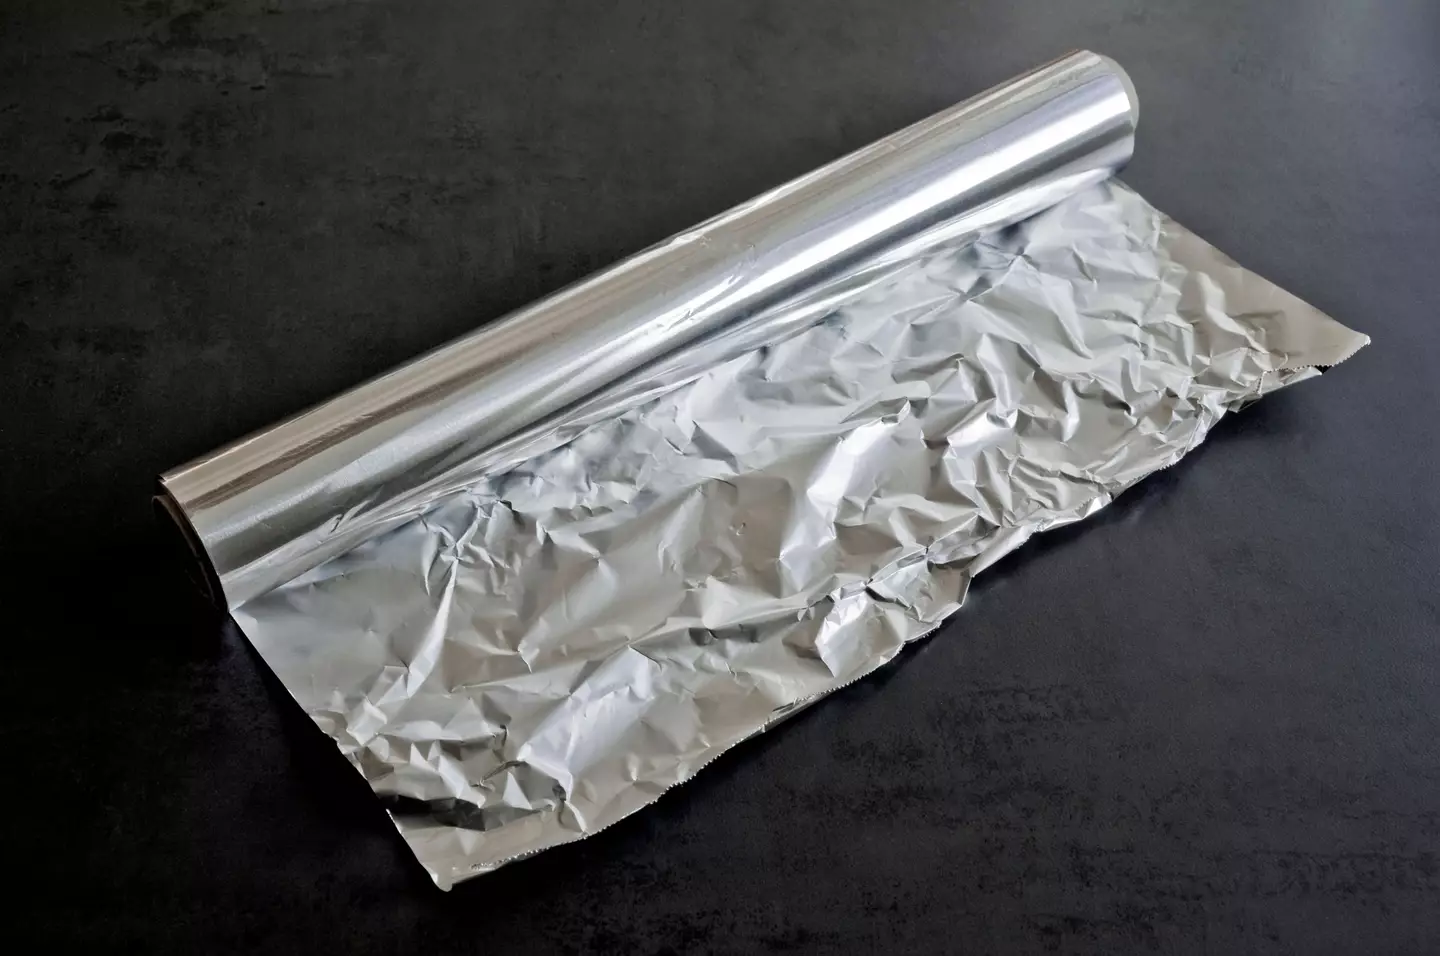 Is tin foil really the answer? Many people don't think so.